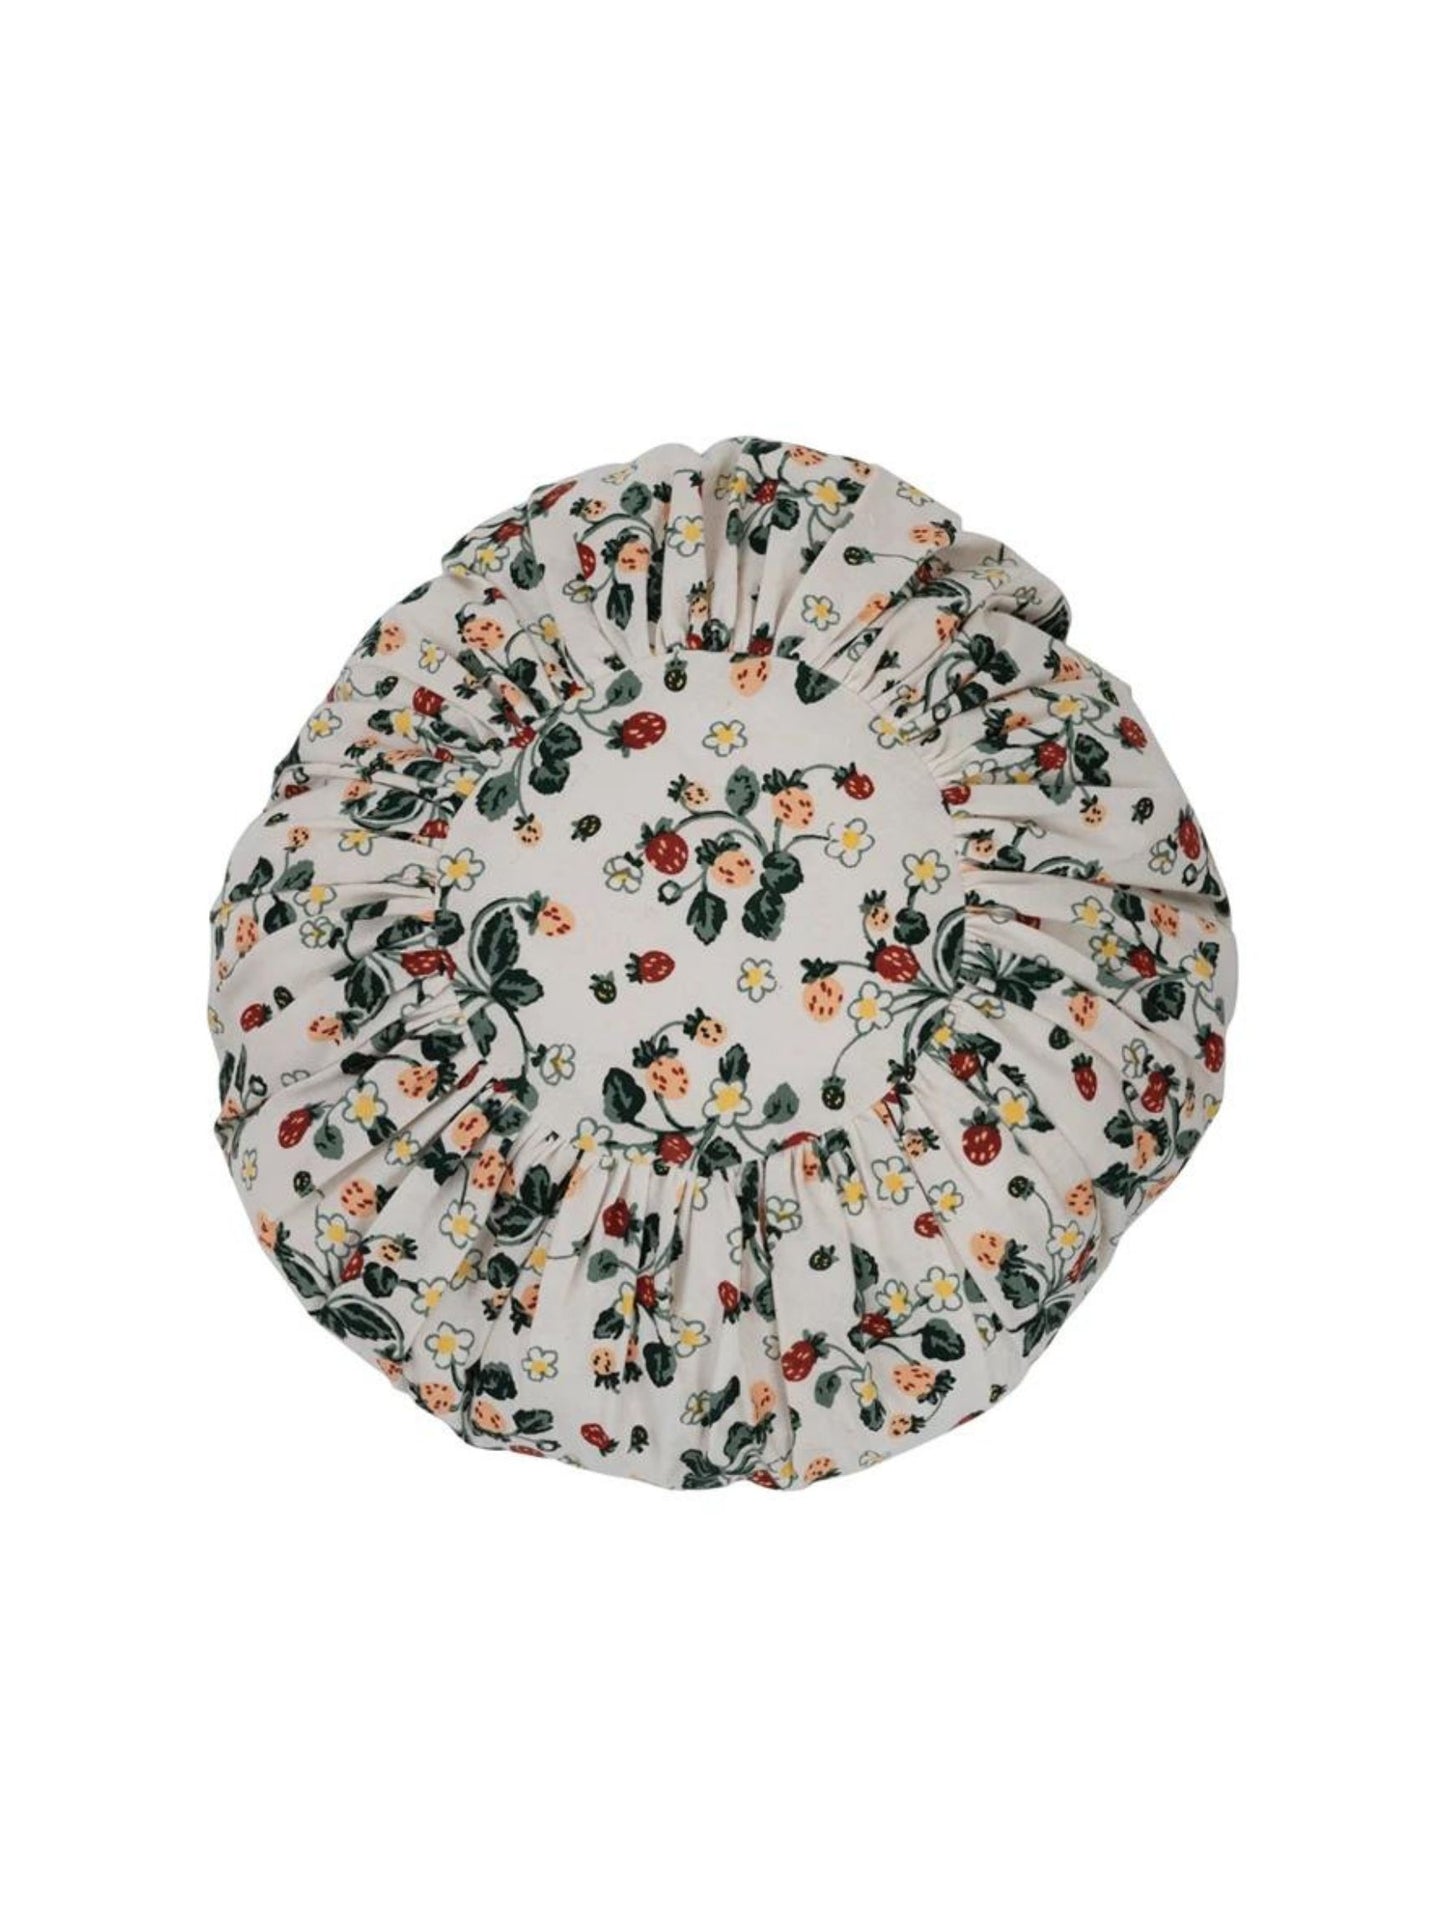 16" Cotton Pleated Pillow with Floral Pattern